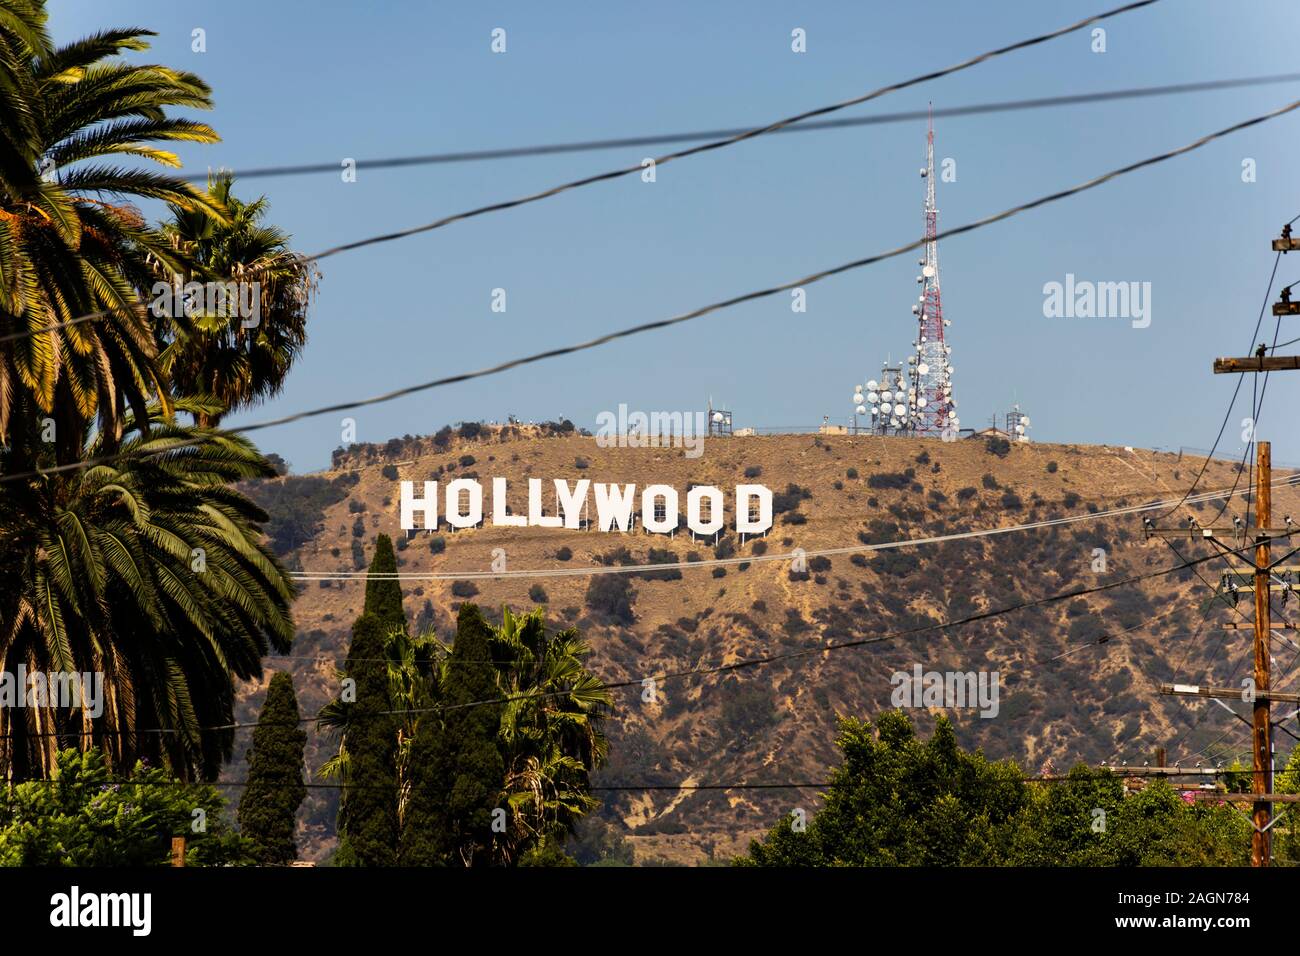 Hollywood sign and communication towers, Hollywood Los Angeles, California, USA Stock Photo